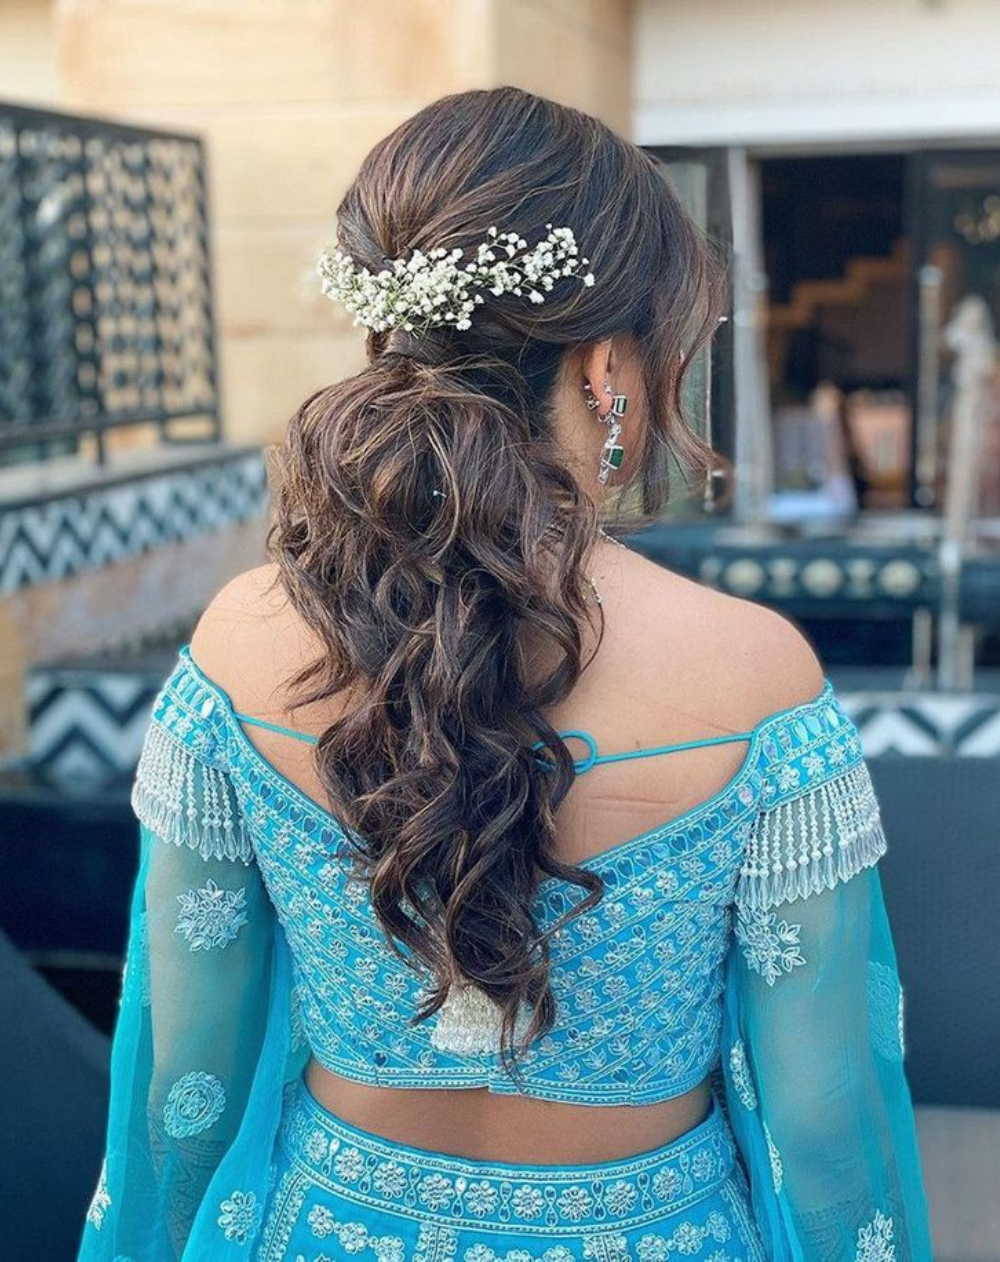 What is the best hairstyle while wearing a ghagra dress? - Quora